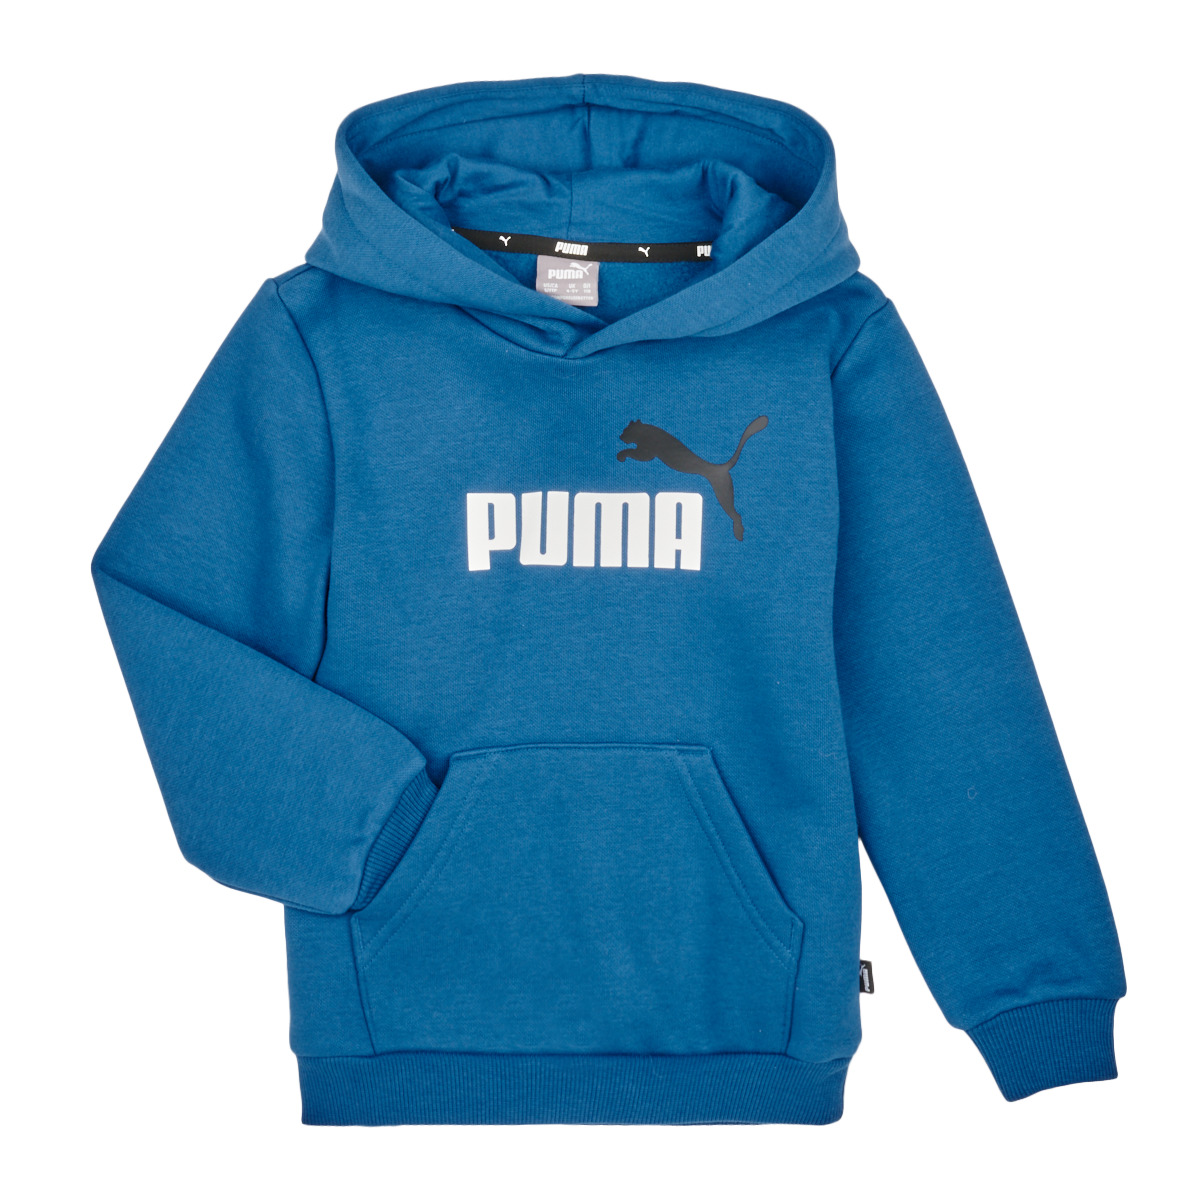 delivery 26,40 Clothing HOODIE Spartoo Puma Child | BIG - Europe Blue 2 ! LOGO Fast COL ESS - sweaters €